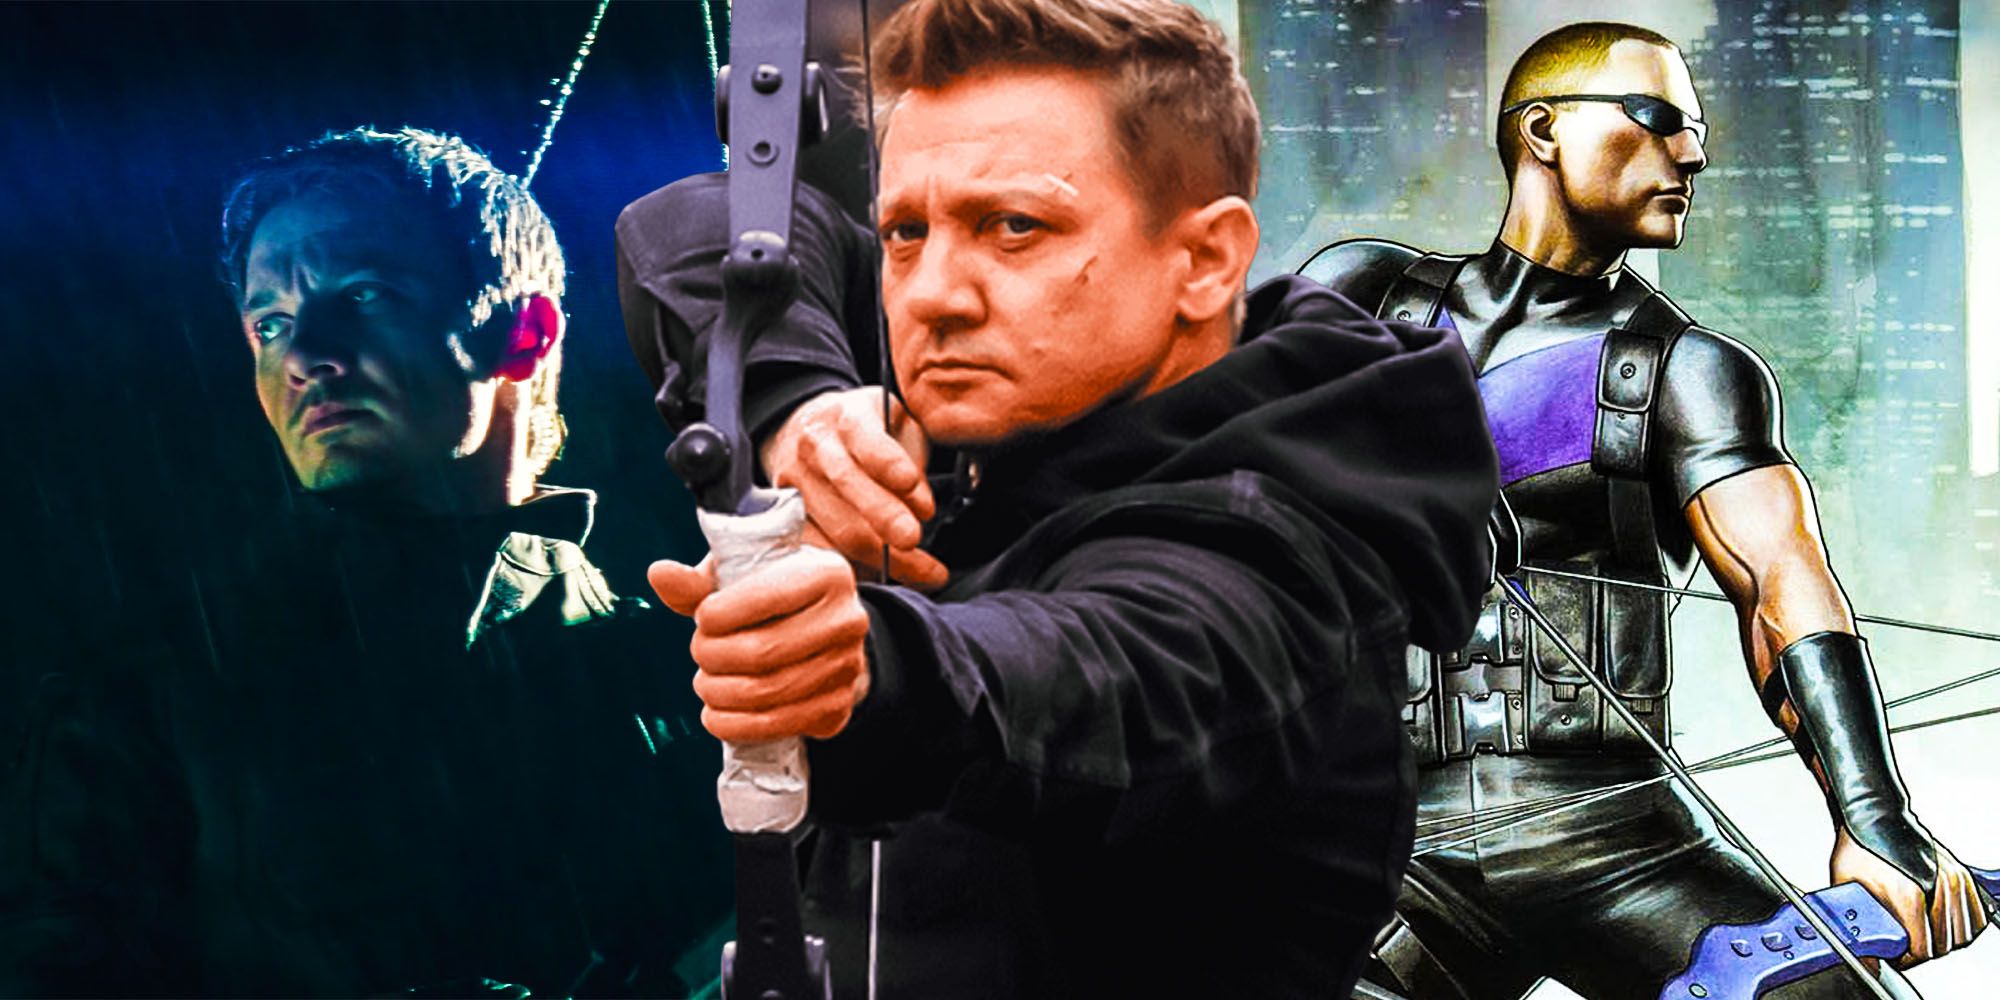 How old is Hawkeye in the MCU older in comics